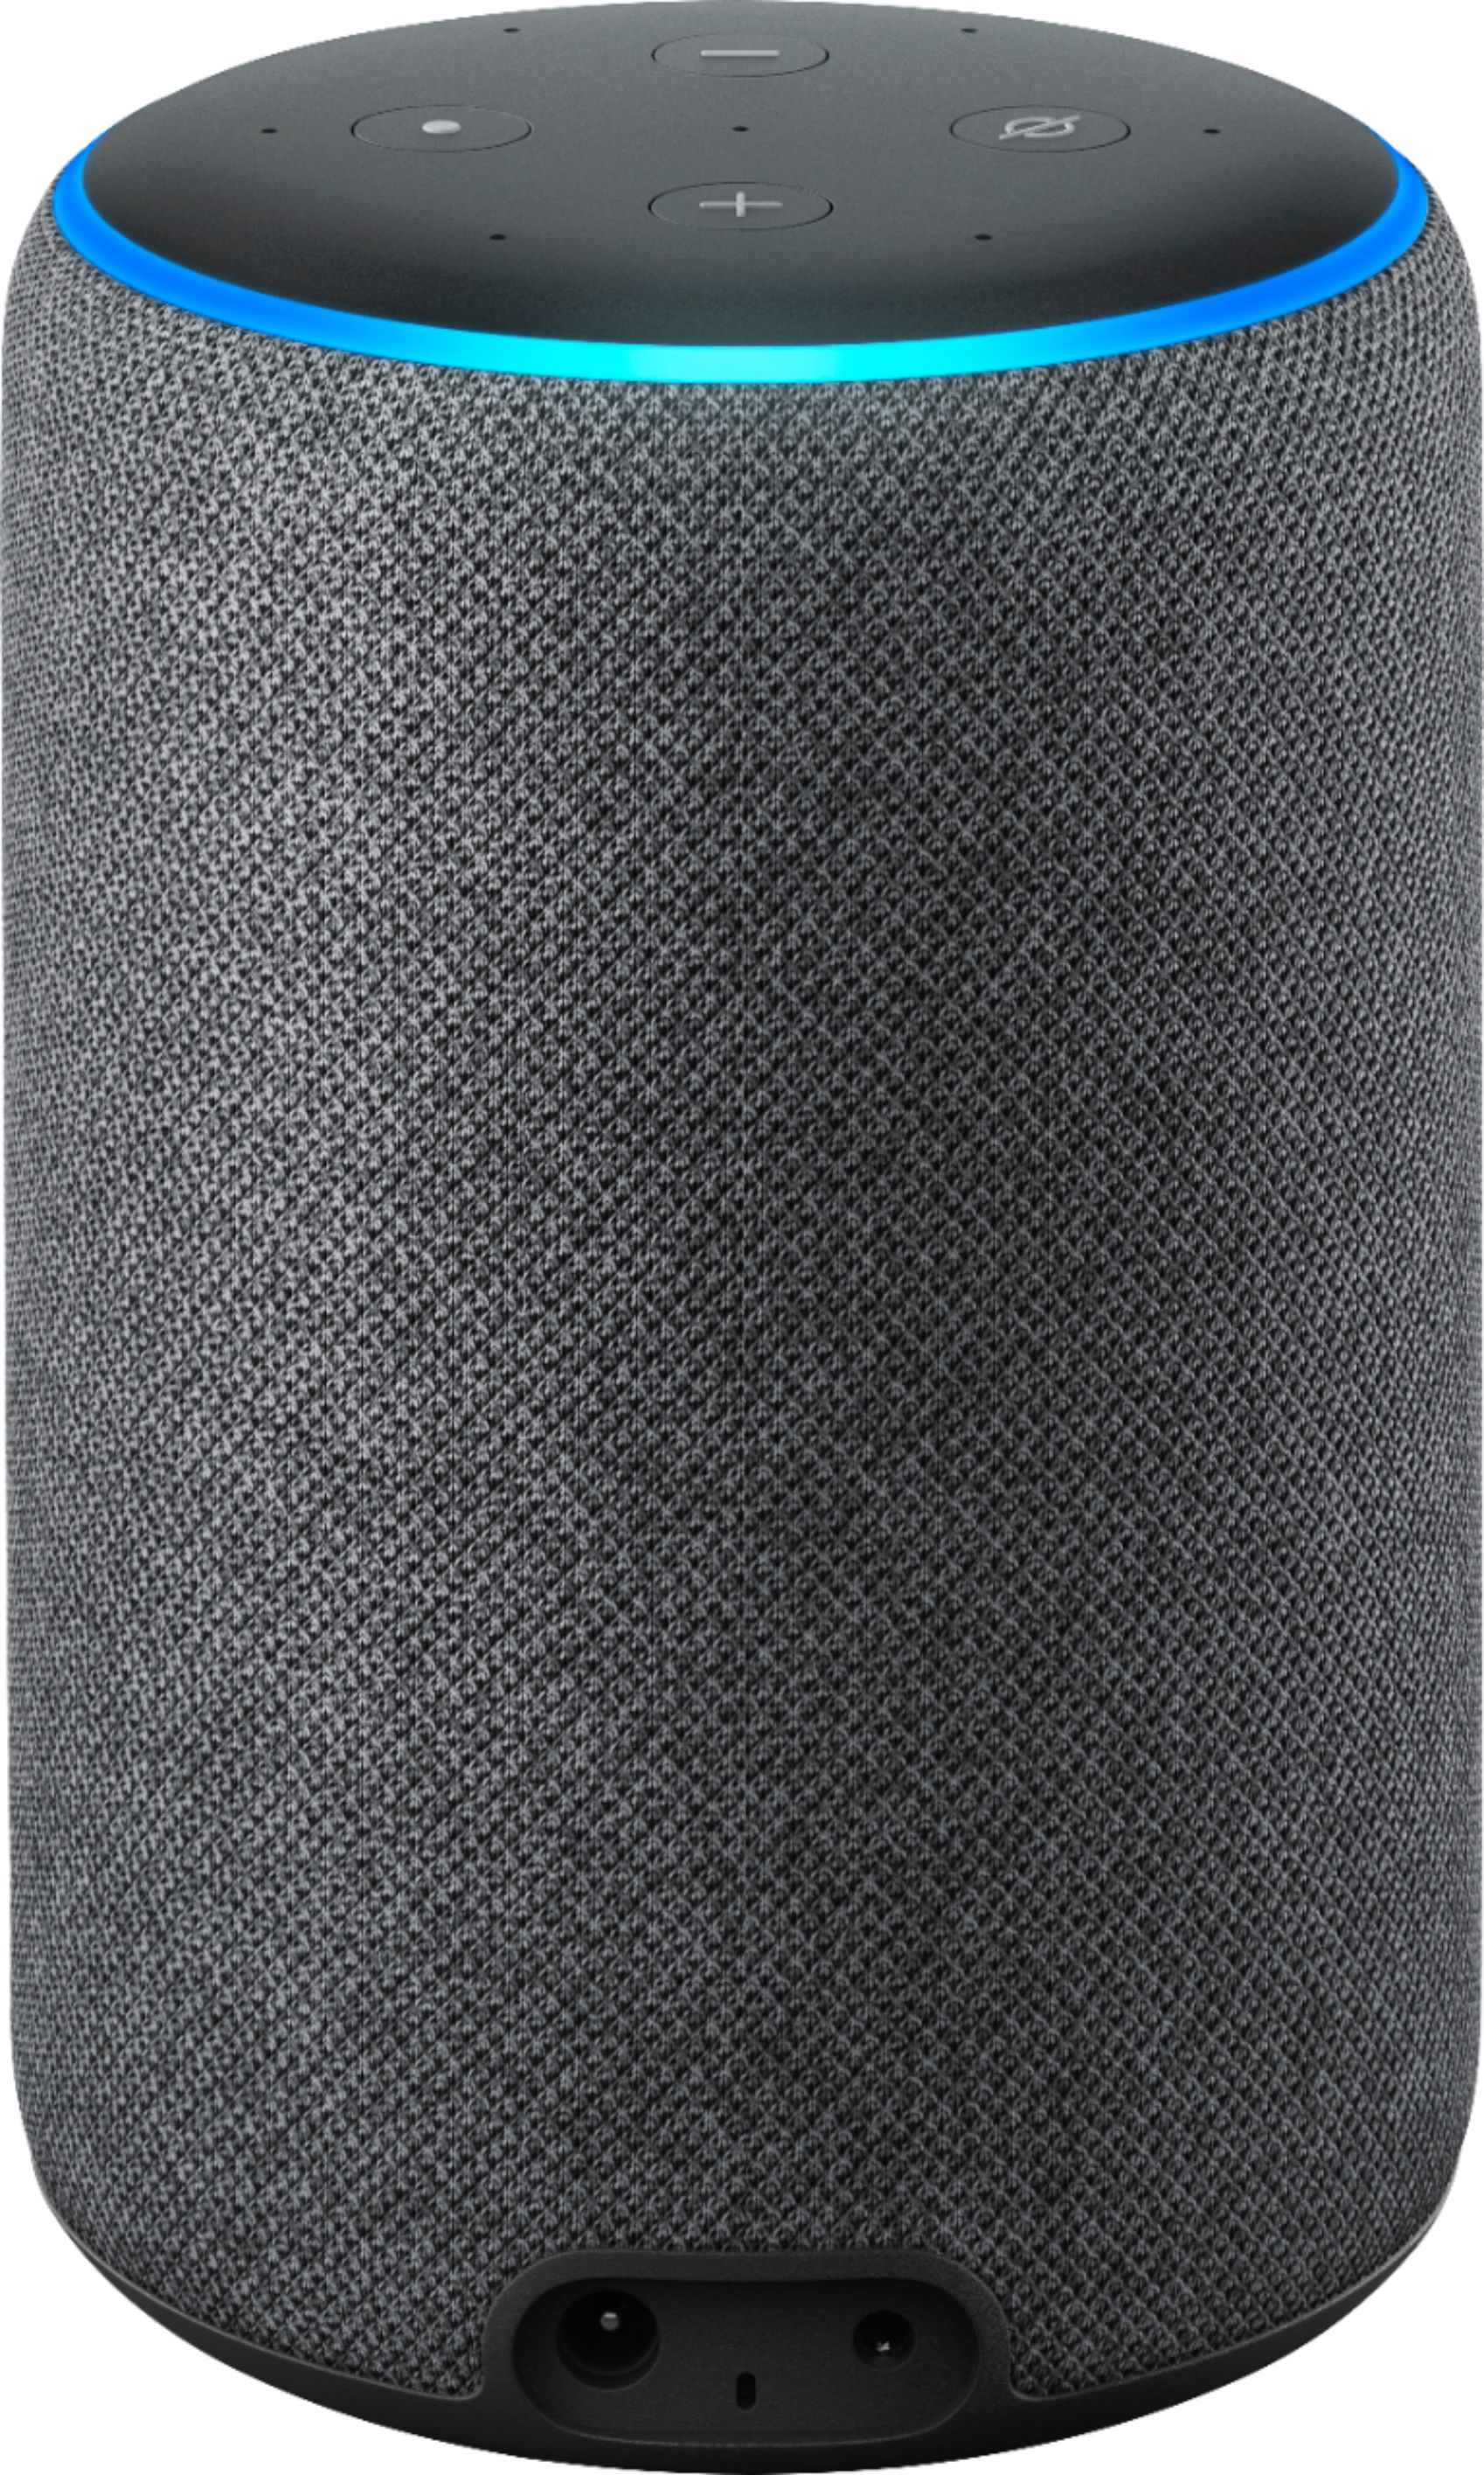 2nd Generation Charcoal Premium Sound with Built-In Hub Amazon Echo Plus 